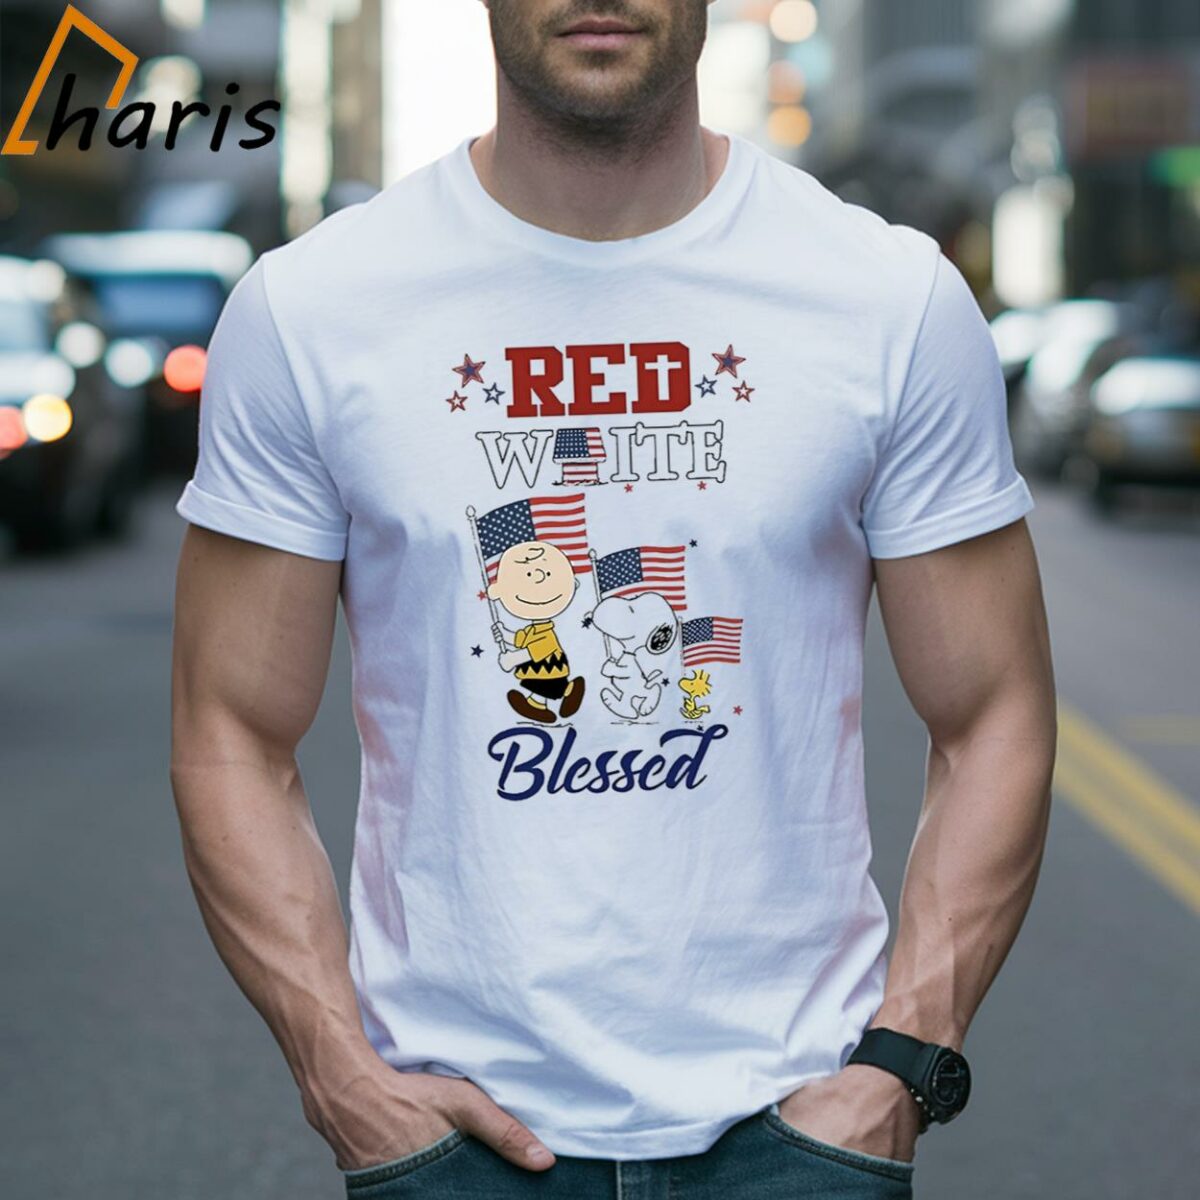 Snoopy Charlie Brown Peanuts The Independence Day Red White Blessed T shirt 2 Shirt